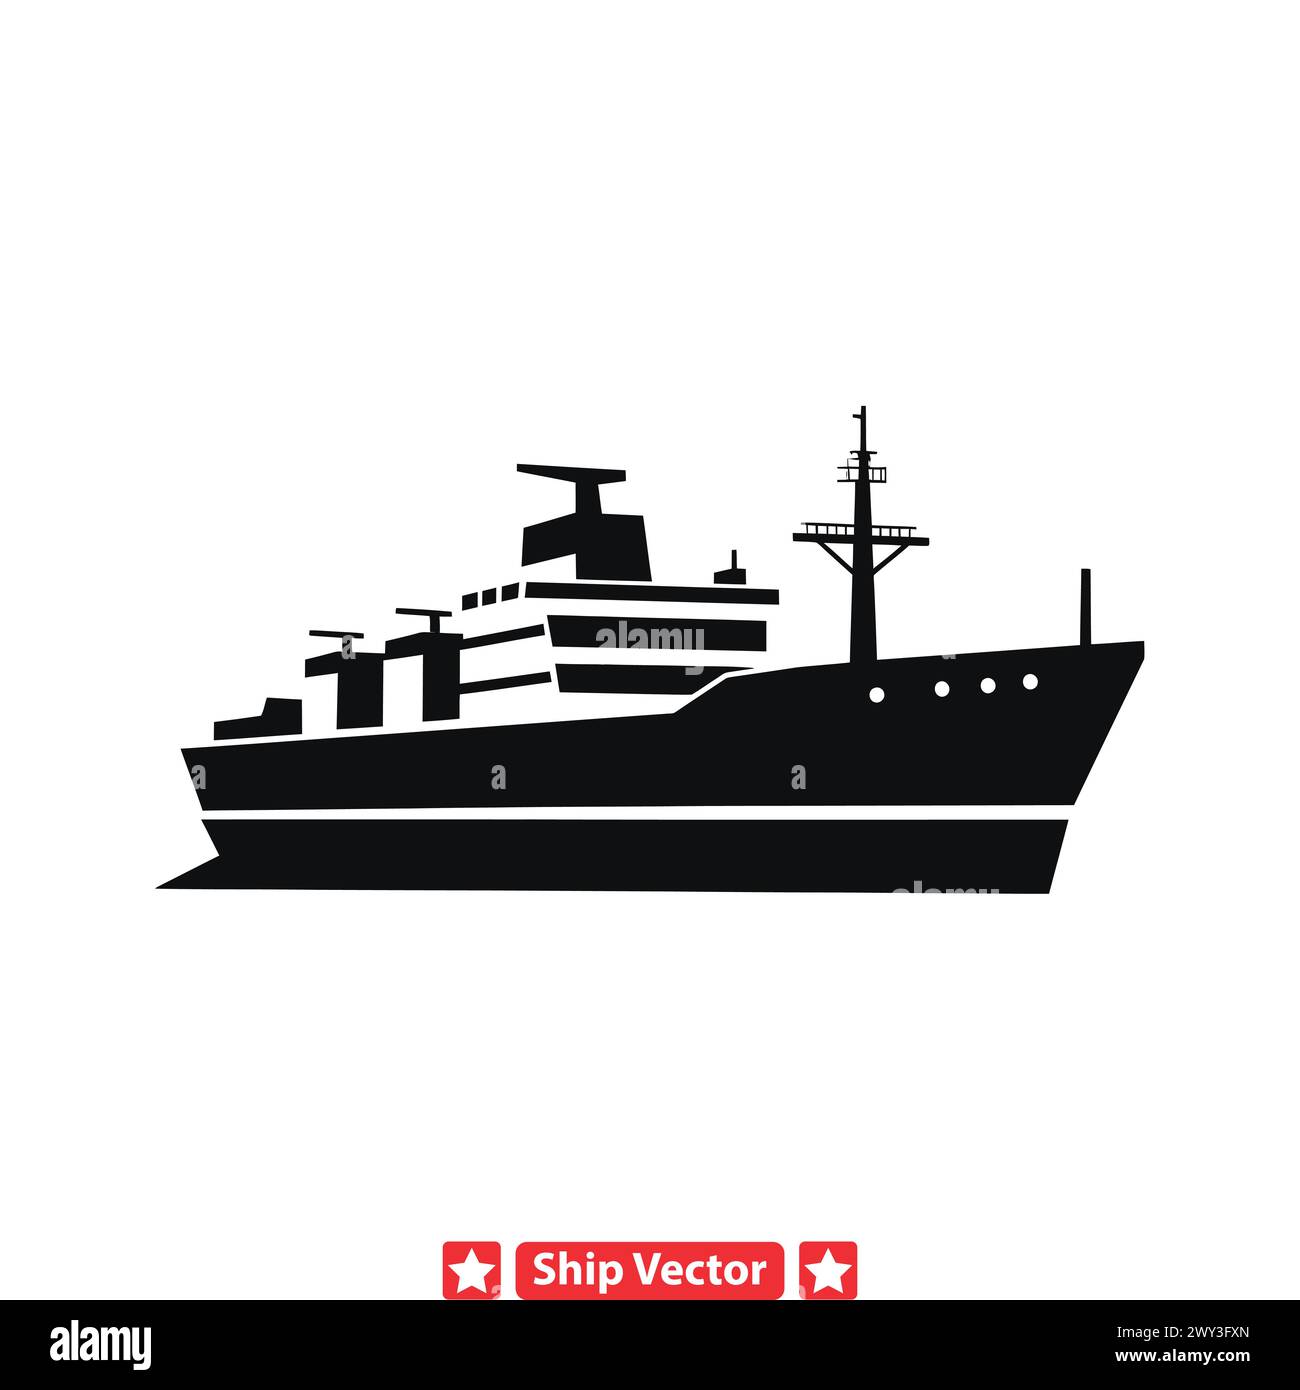 Naval Pride  Distinguished Ship Silhouettes Honoring the Valor and Sacrifice of Maritime Heroes Stock Vector